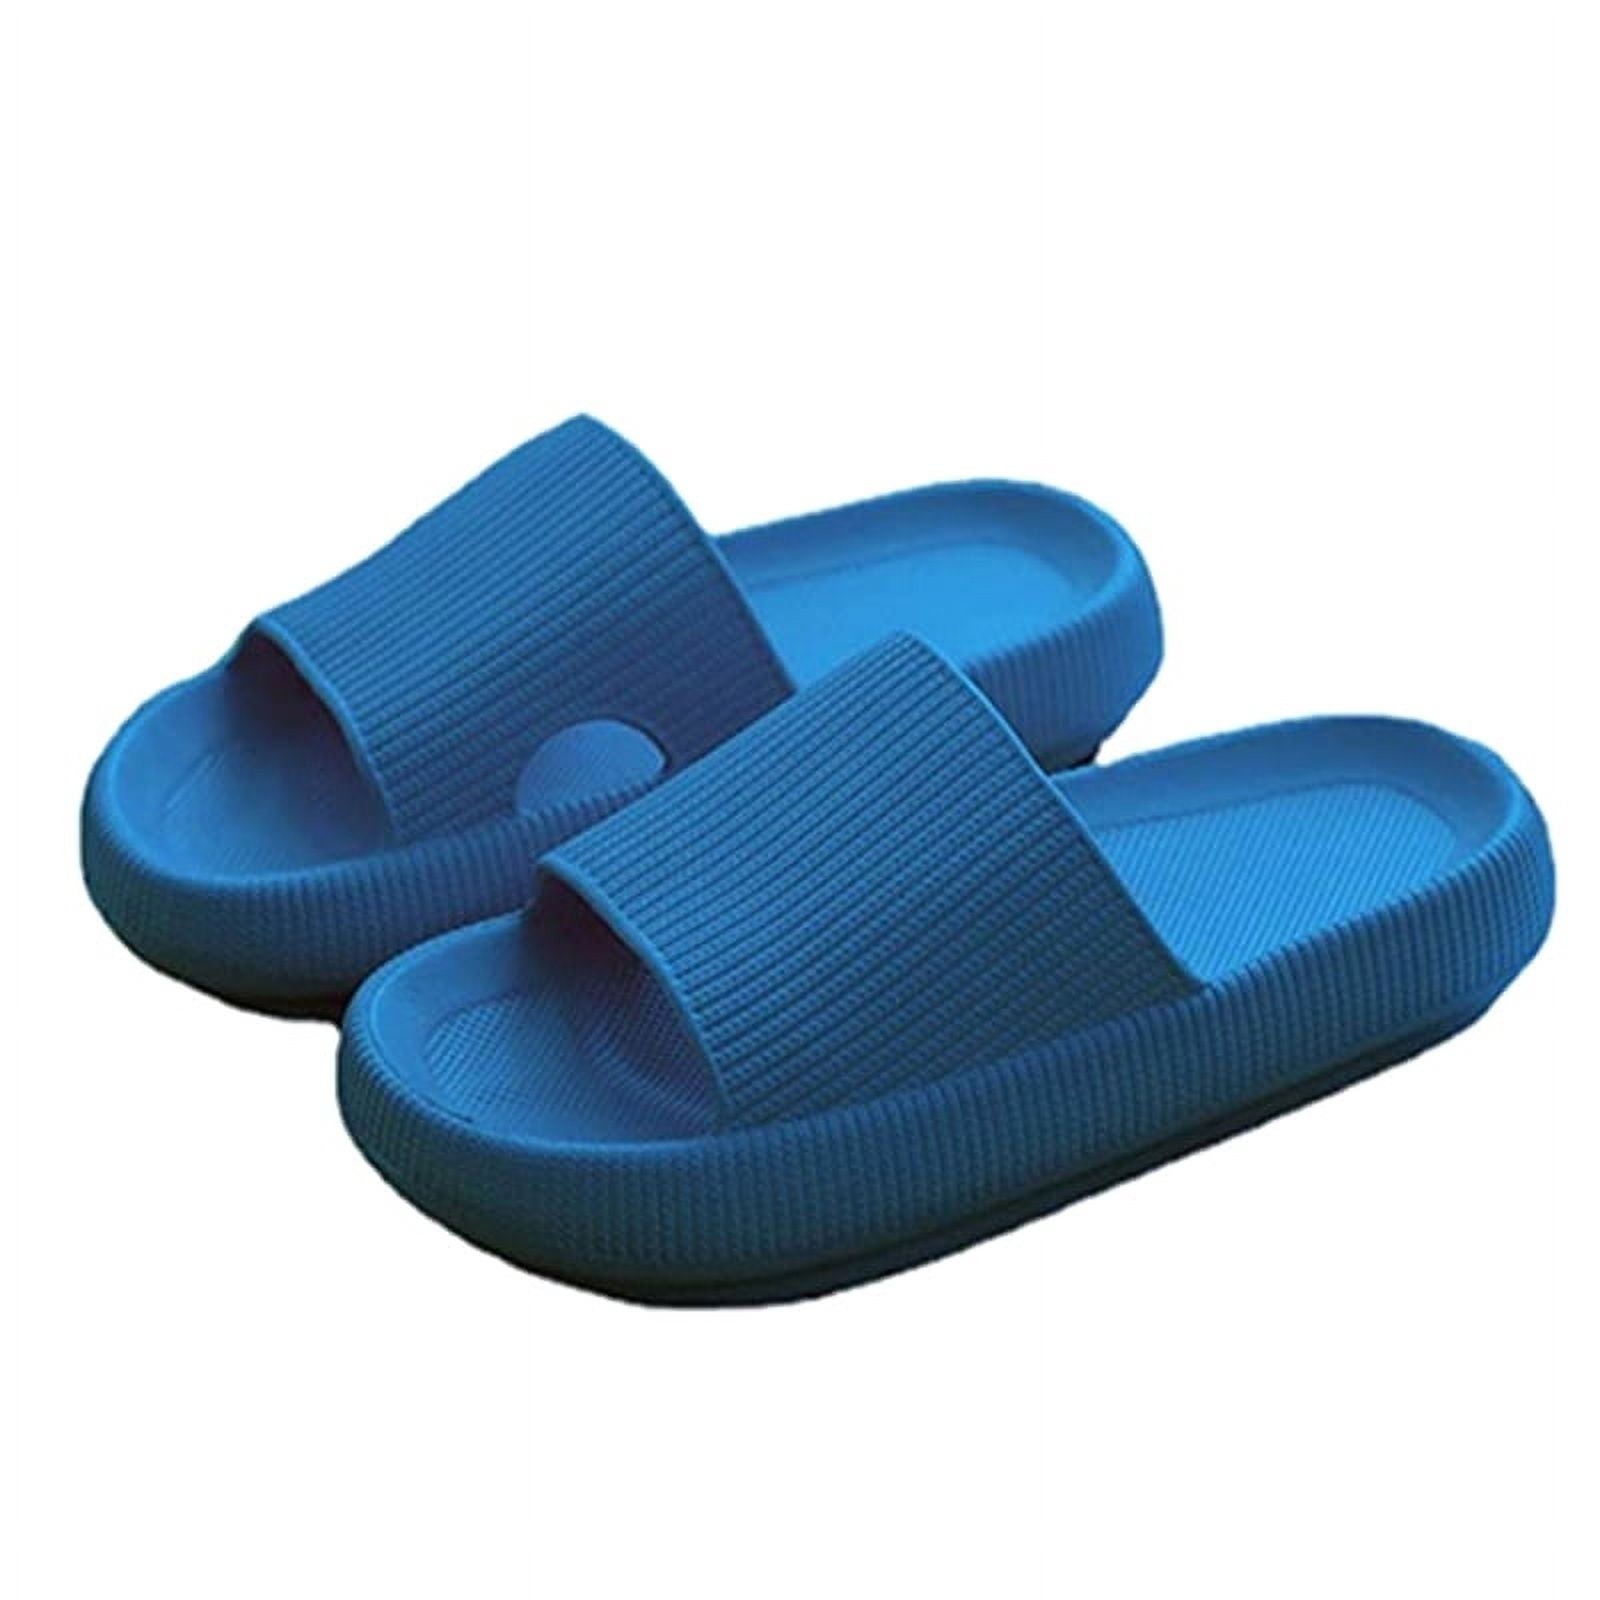  Cloud Slides for Women and Men, Comfy Pillow Slippers